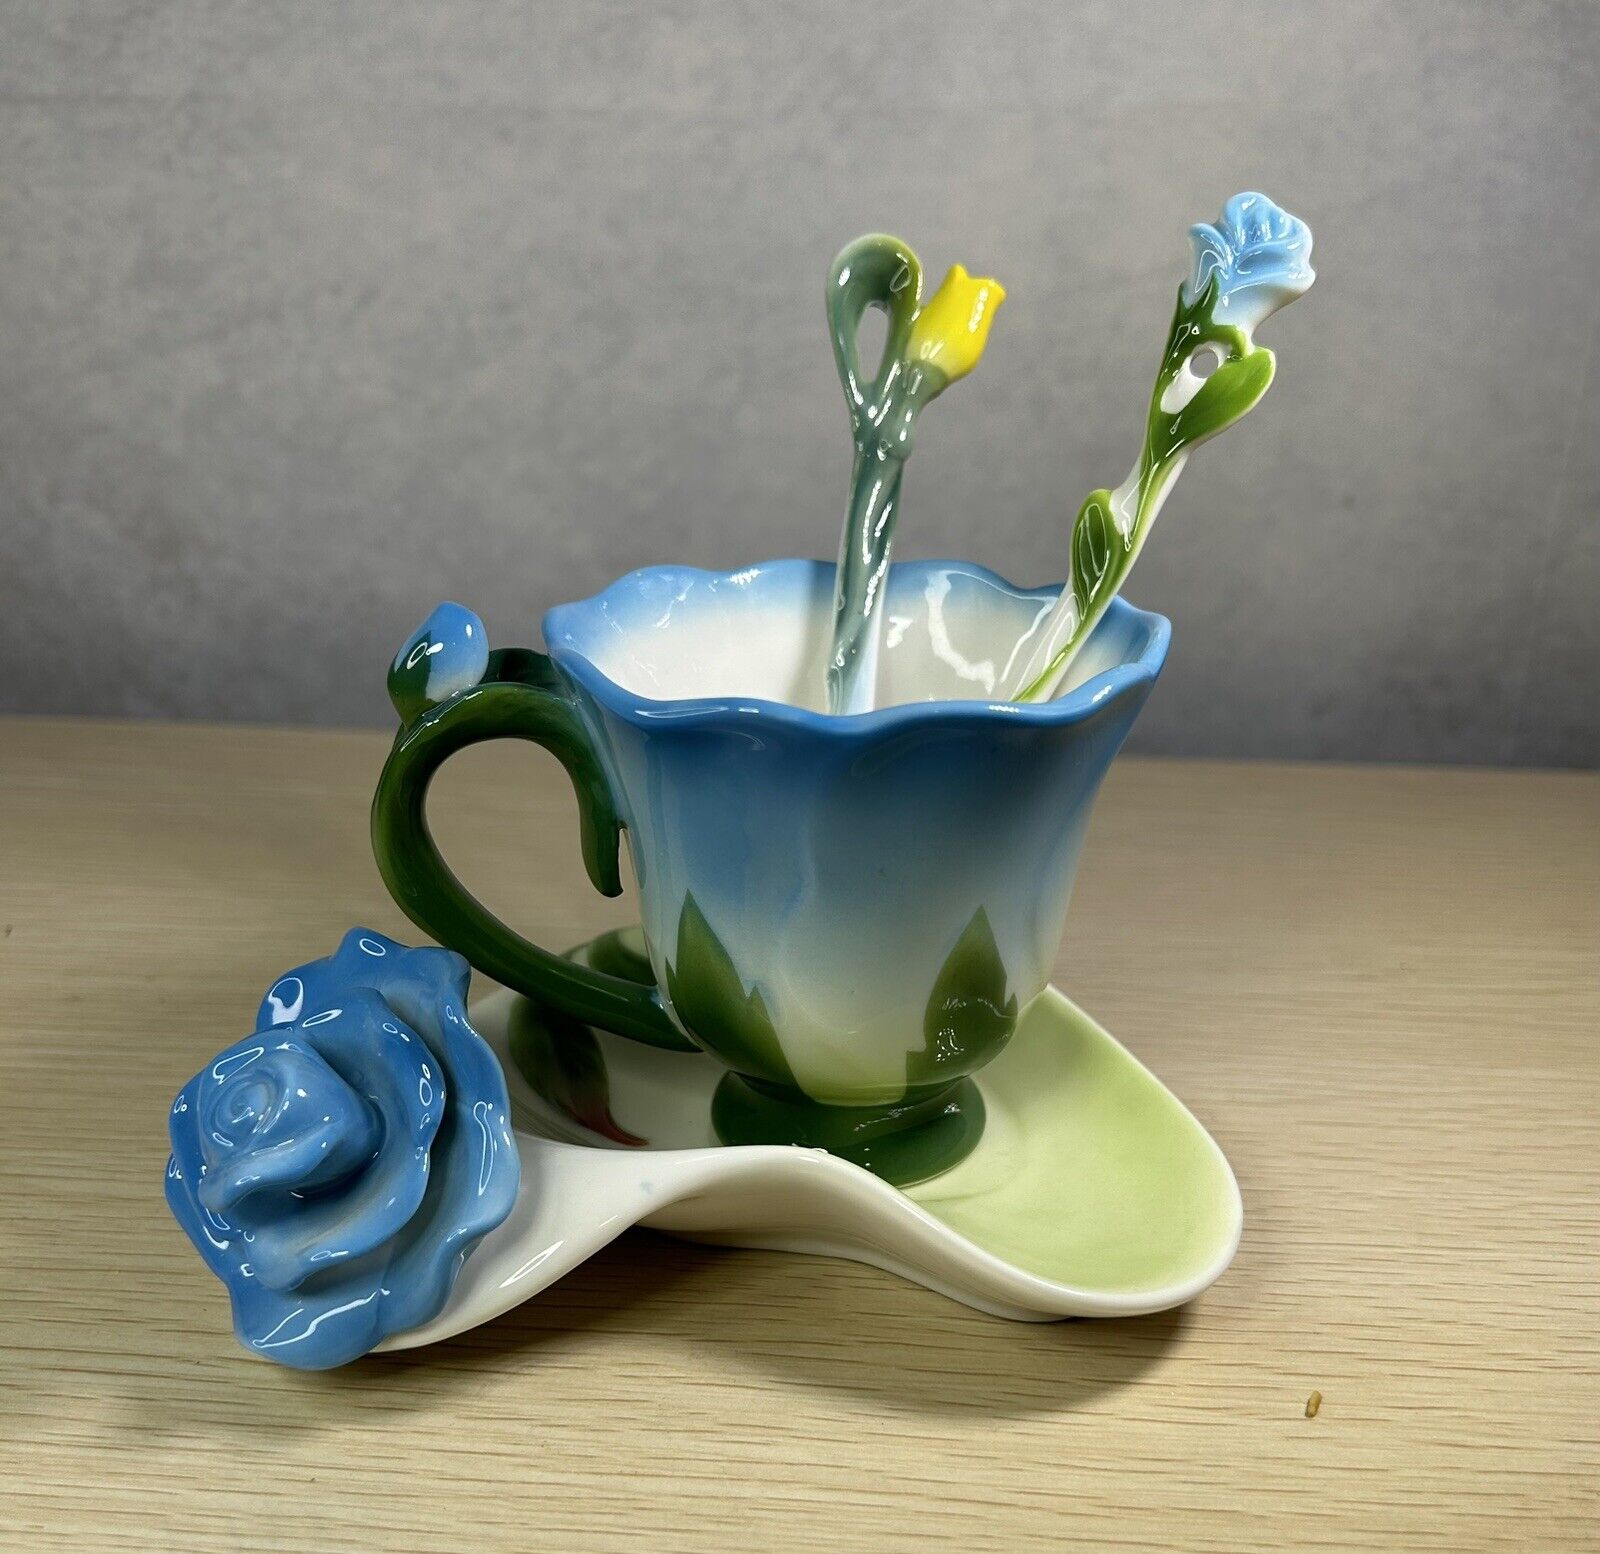 3D Porcelaine Ceramic Rose Teacup And Saucer Set With 2 Spoons Whimsical Style